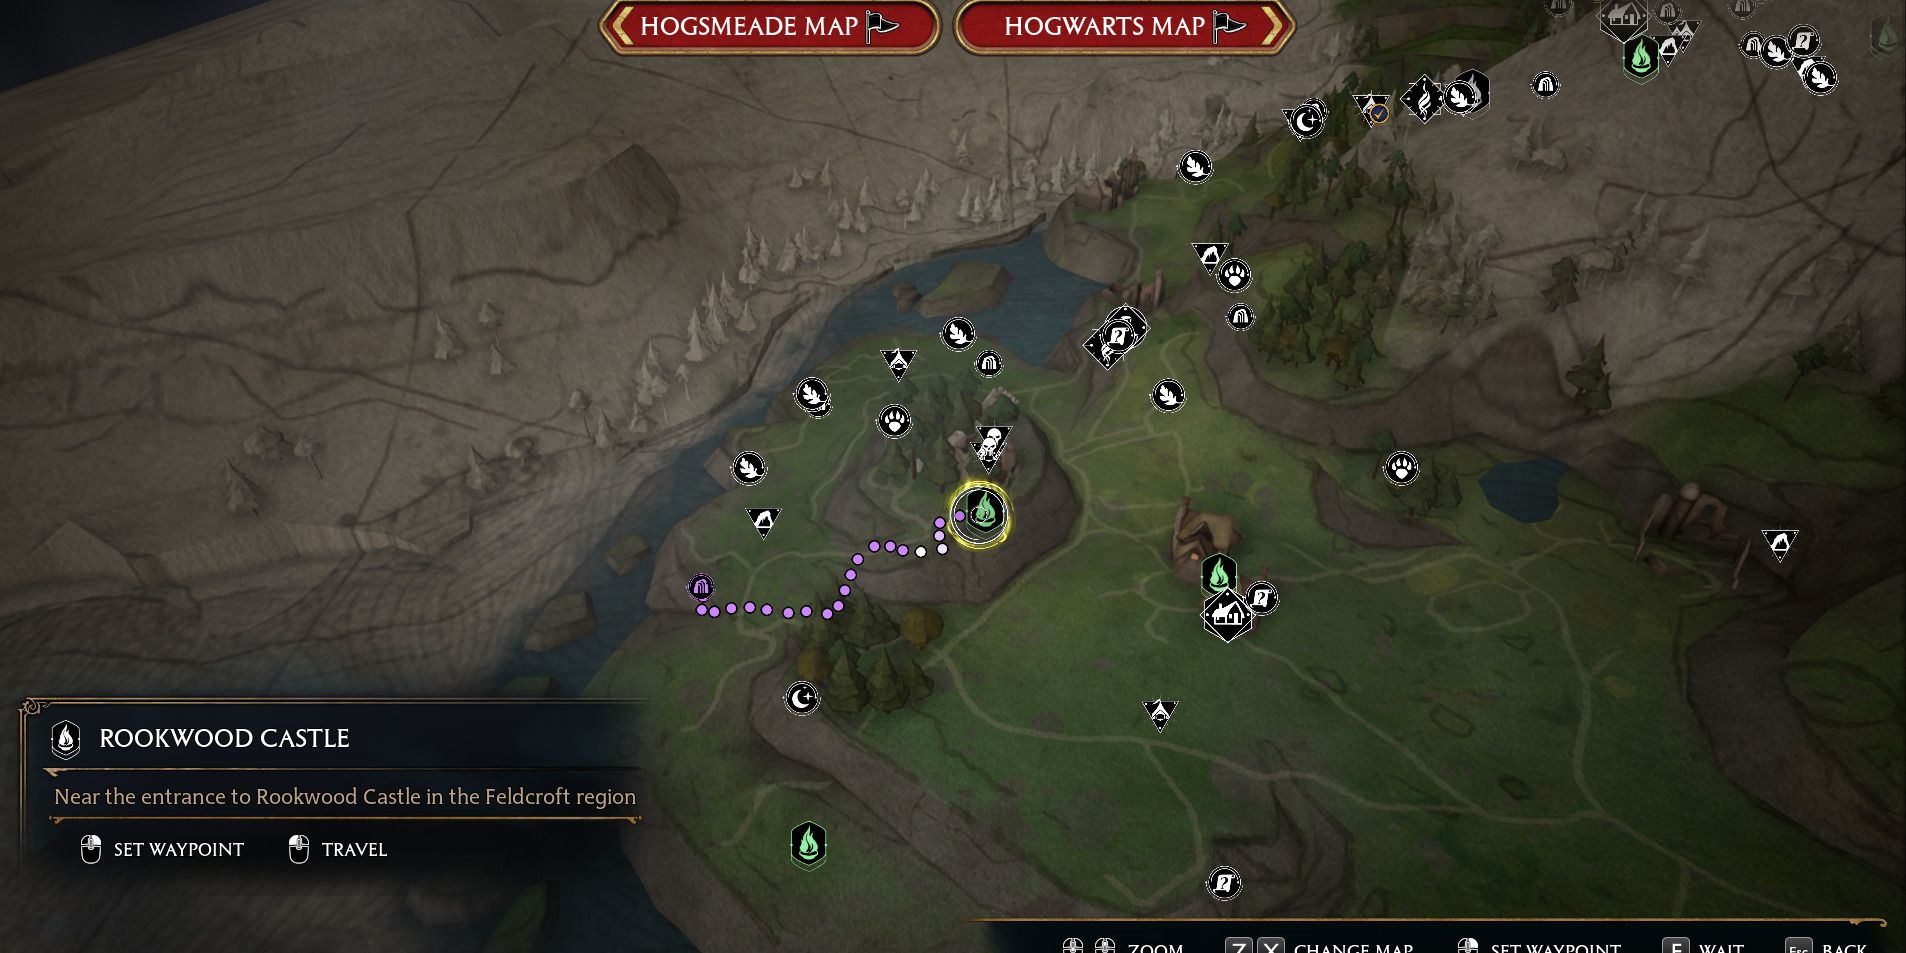 Image of the location on the map of the Rookwood Castle treasure vault in Hogwarts Legacy.